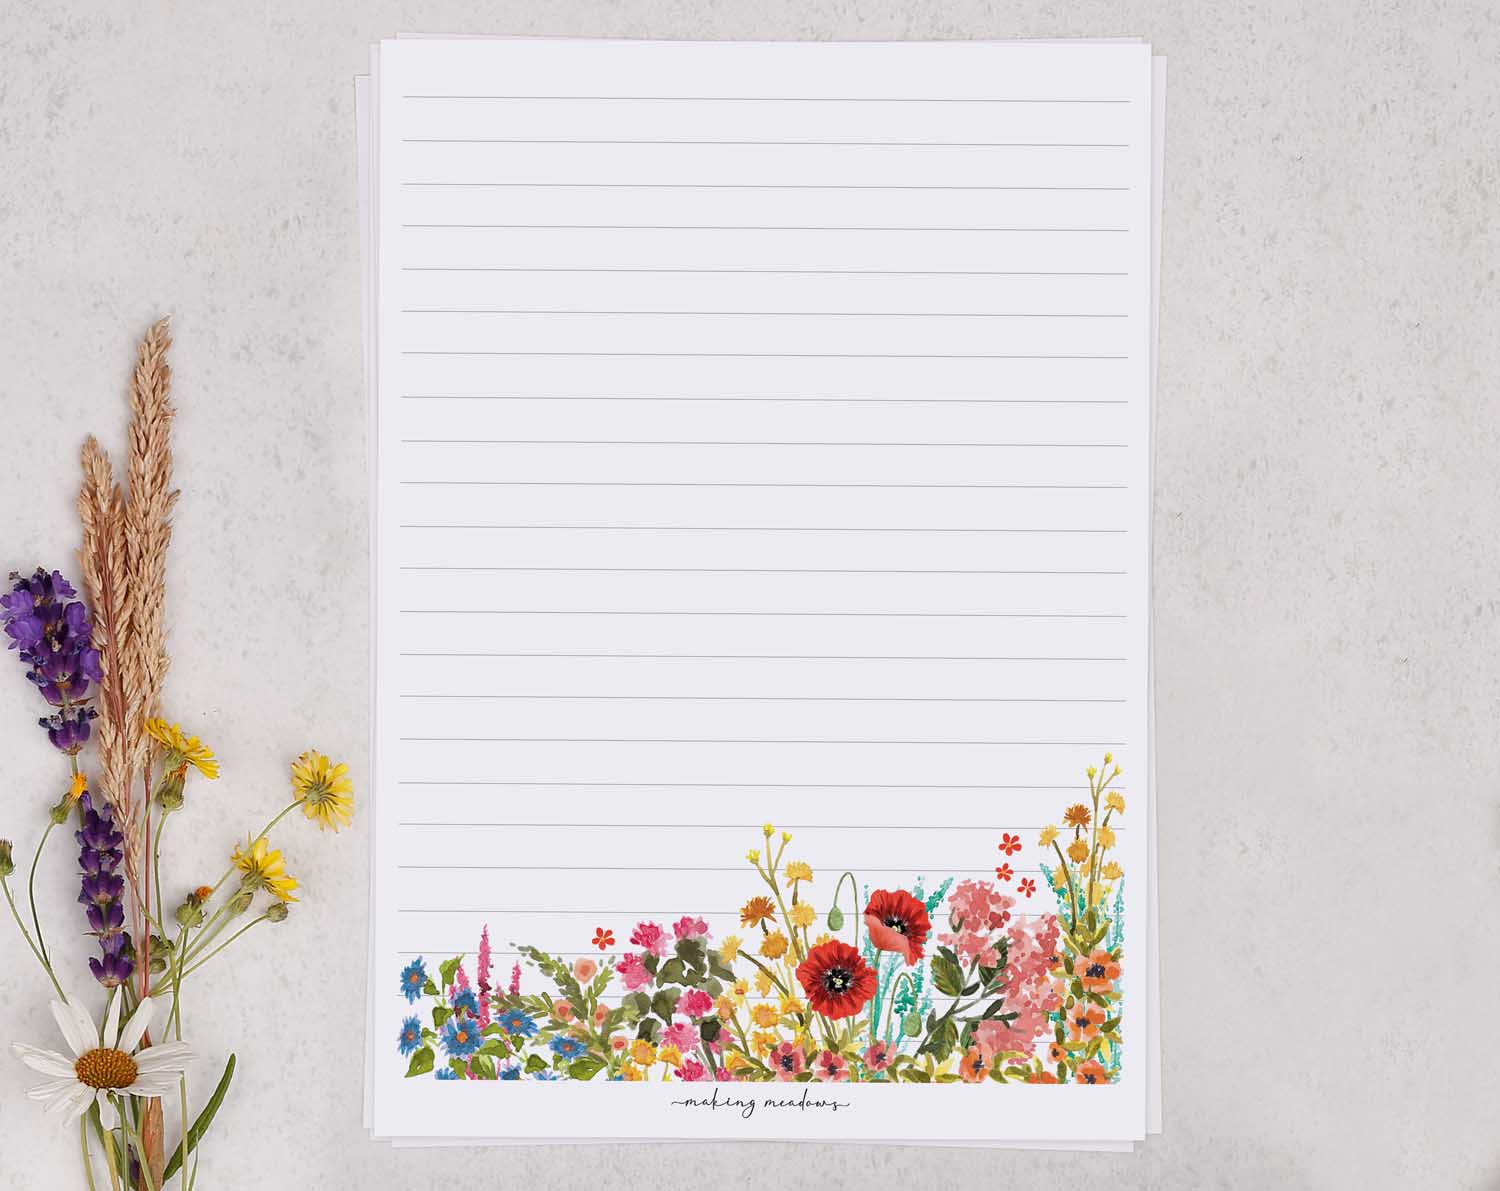 bright wild flowers A5 writing paper set comes with matching envelopes